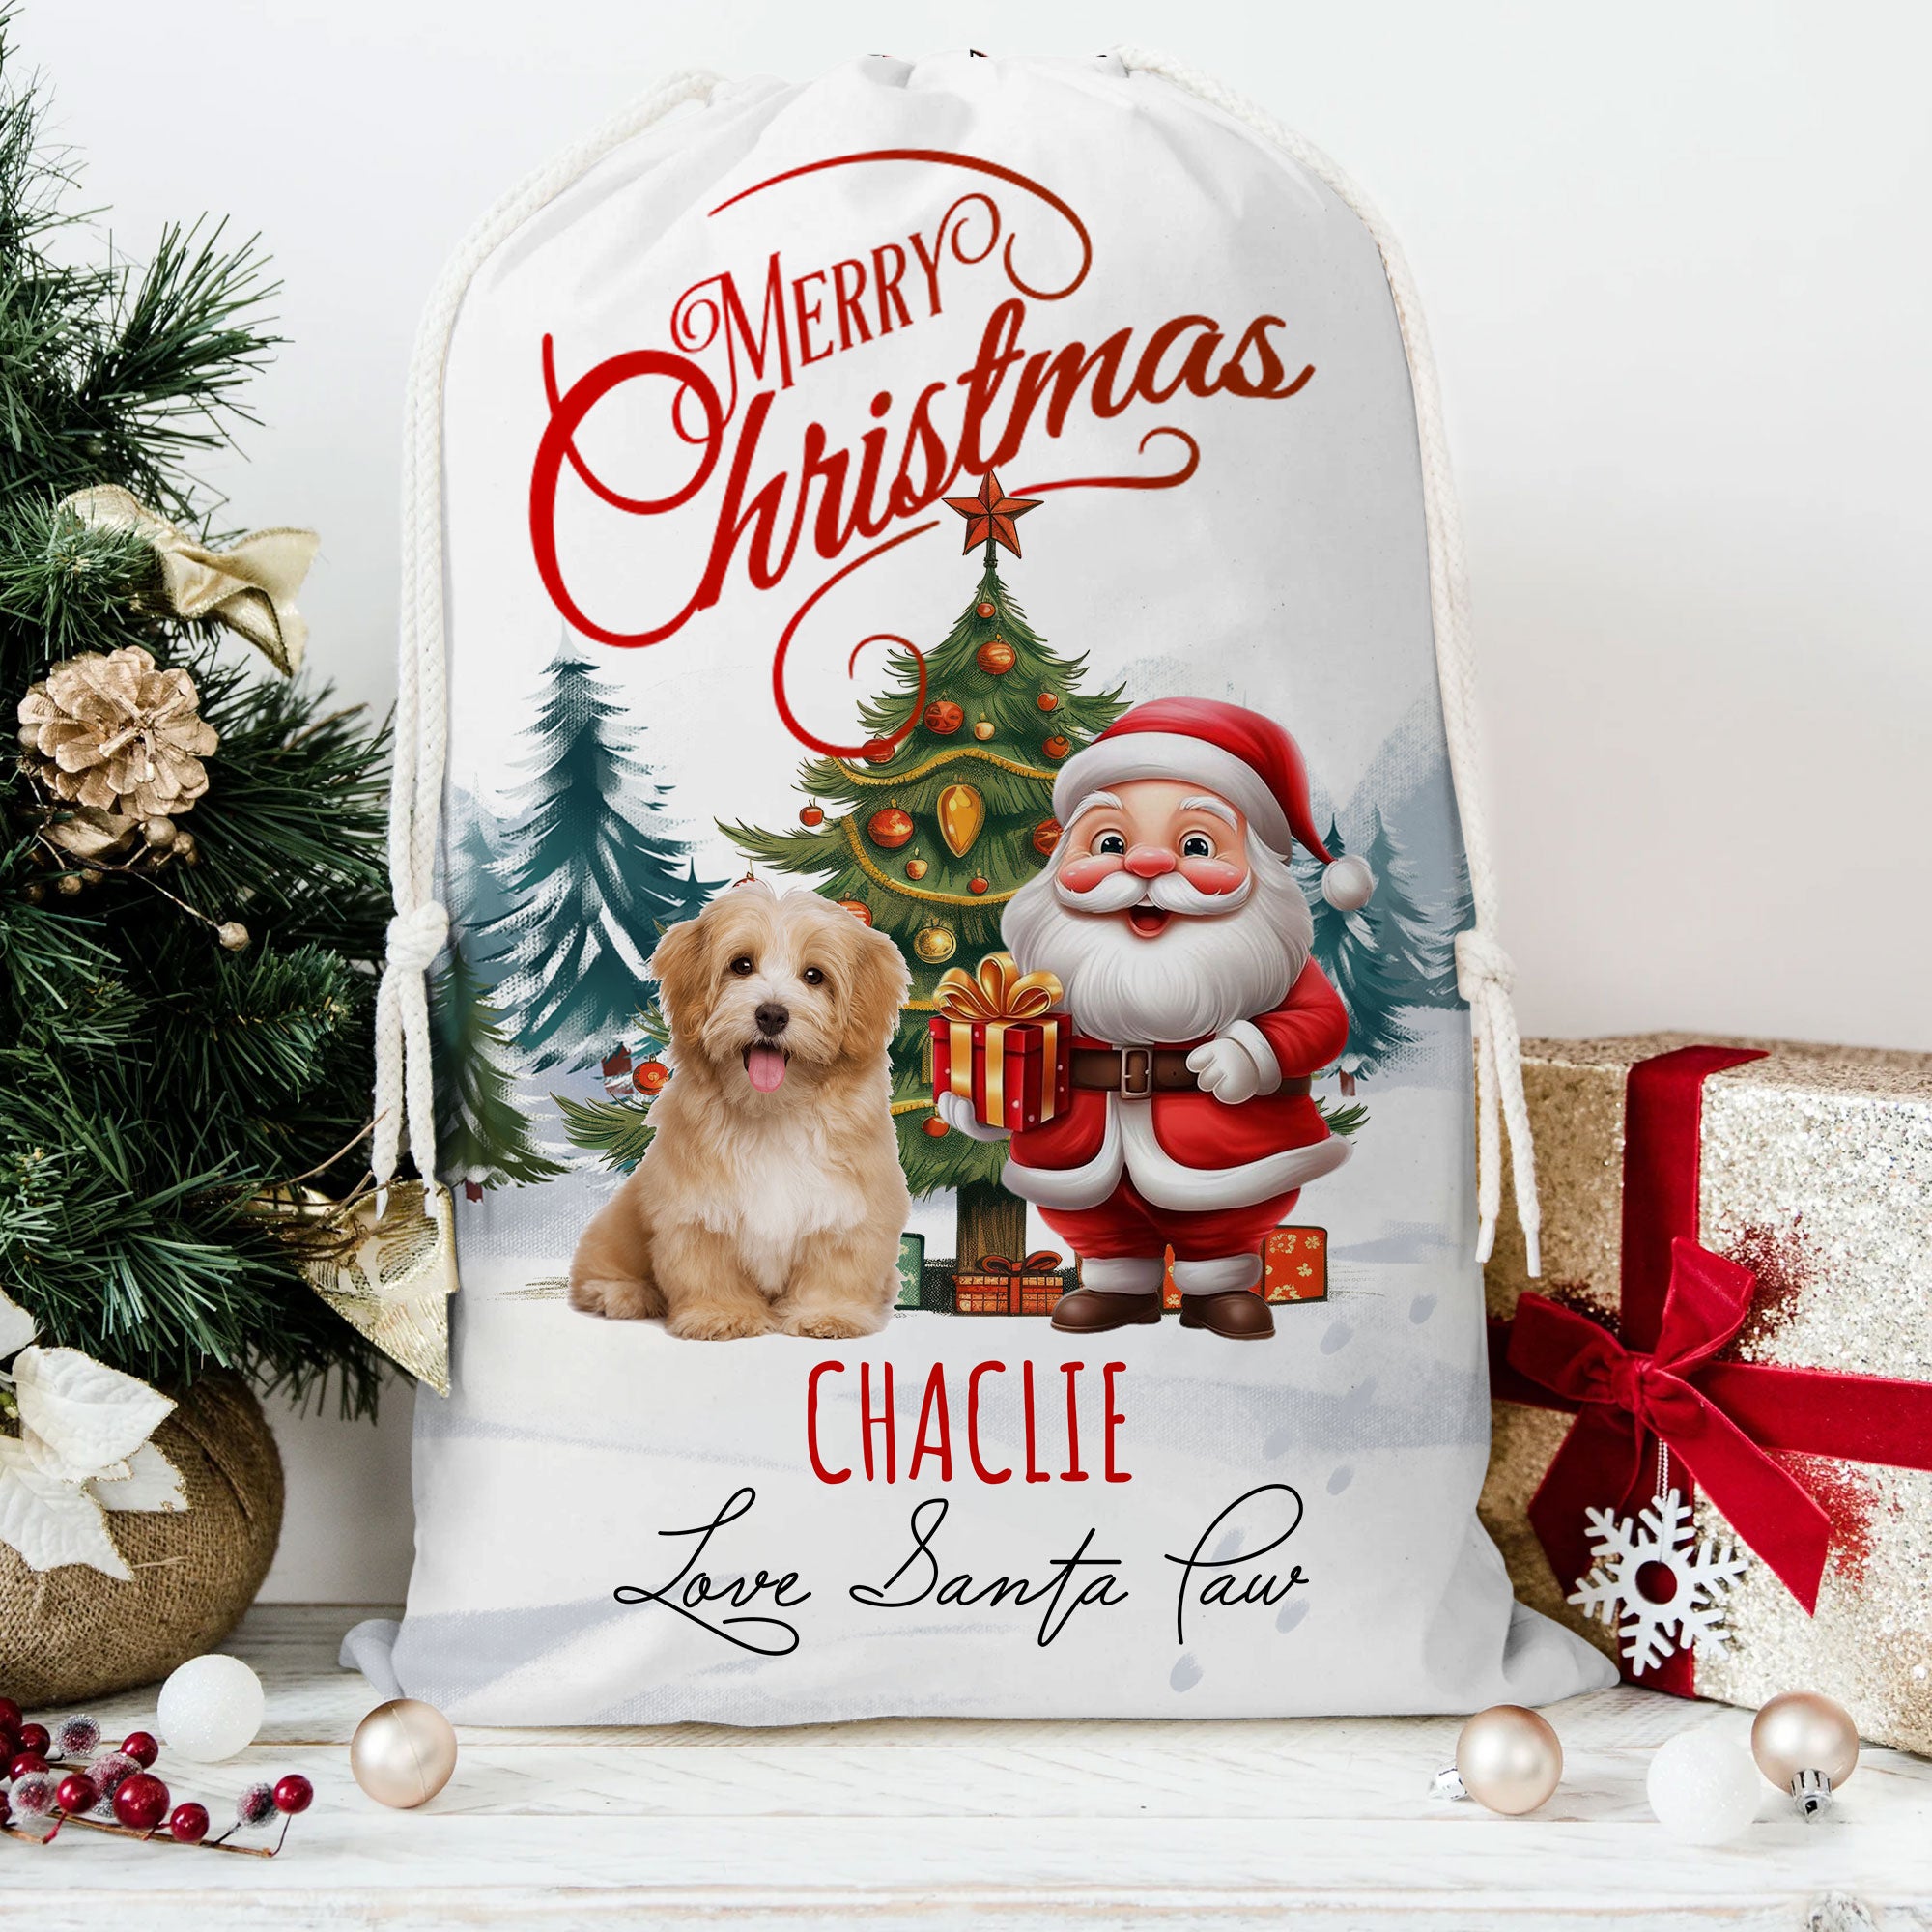 Merry Christmas Pet With Santa Claus - Personalized String Bag, Gift For Family, Christmas Gift